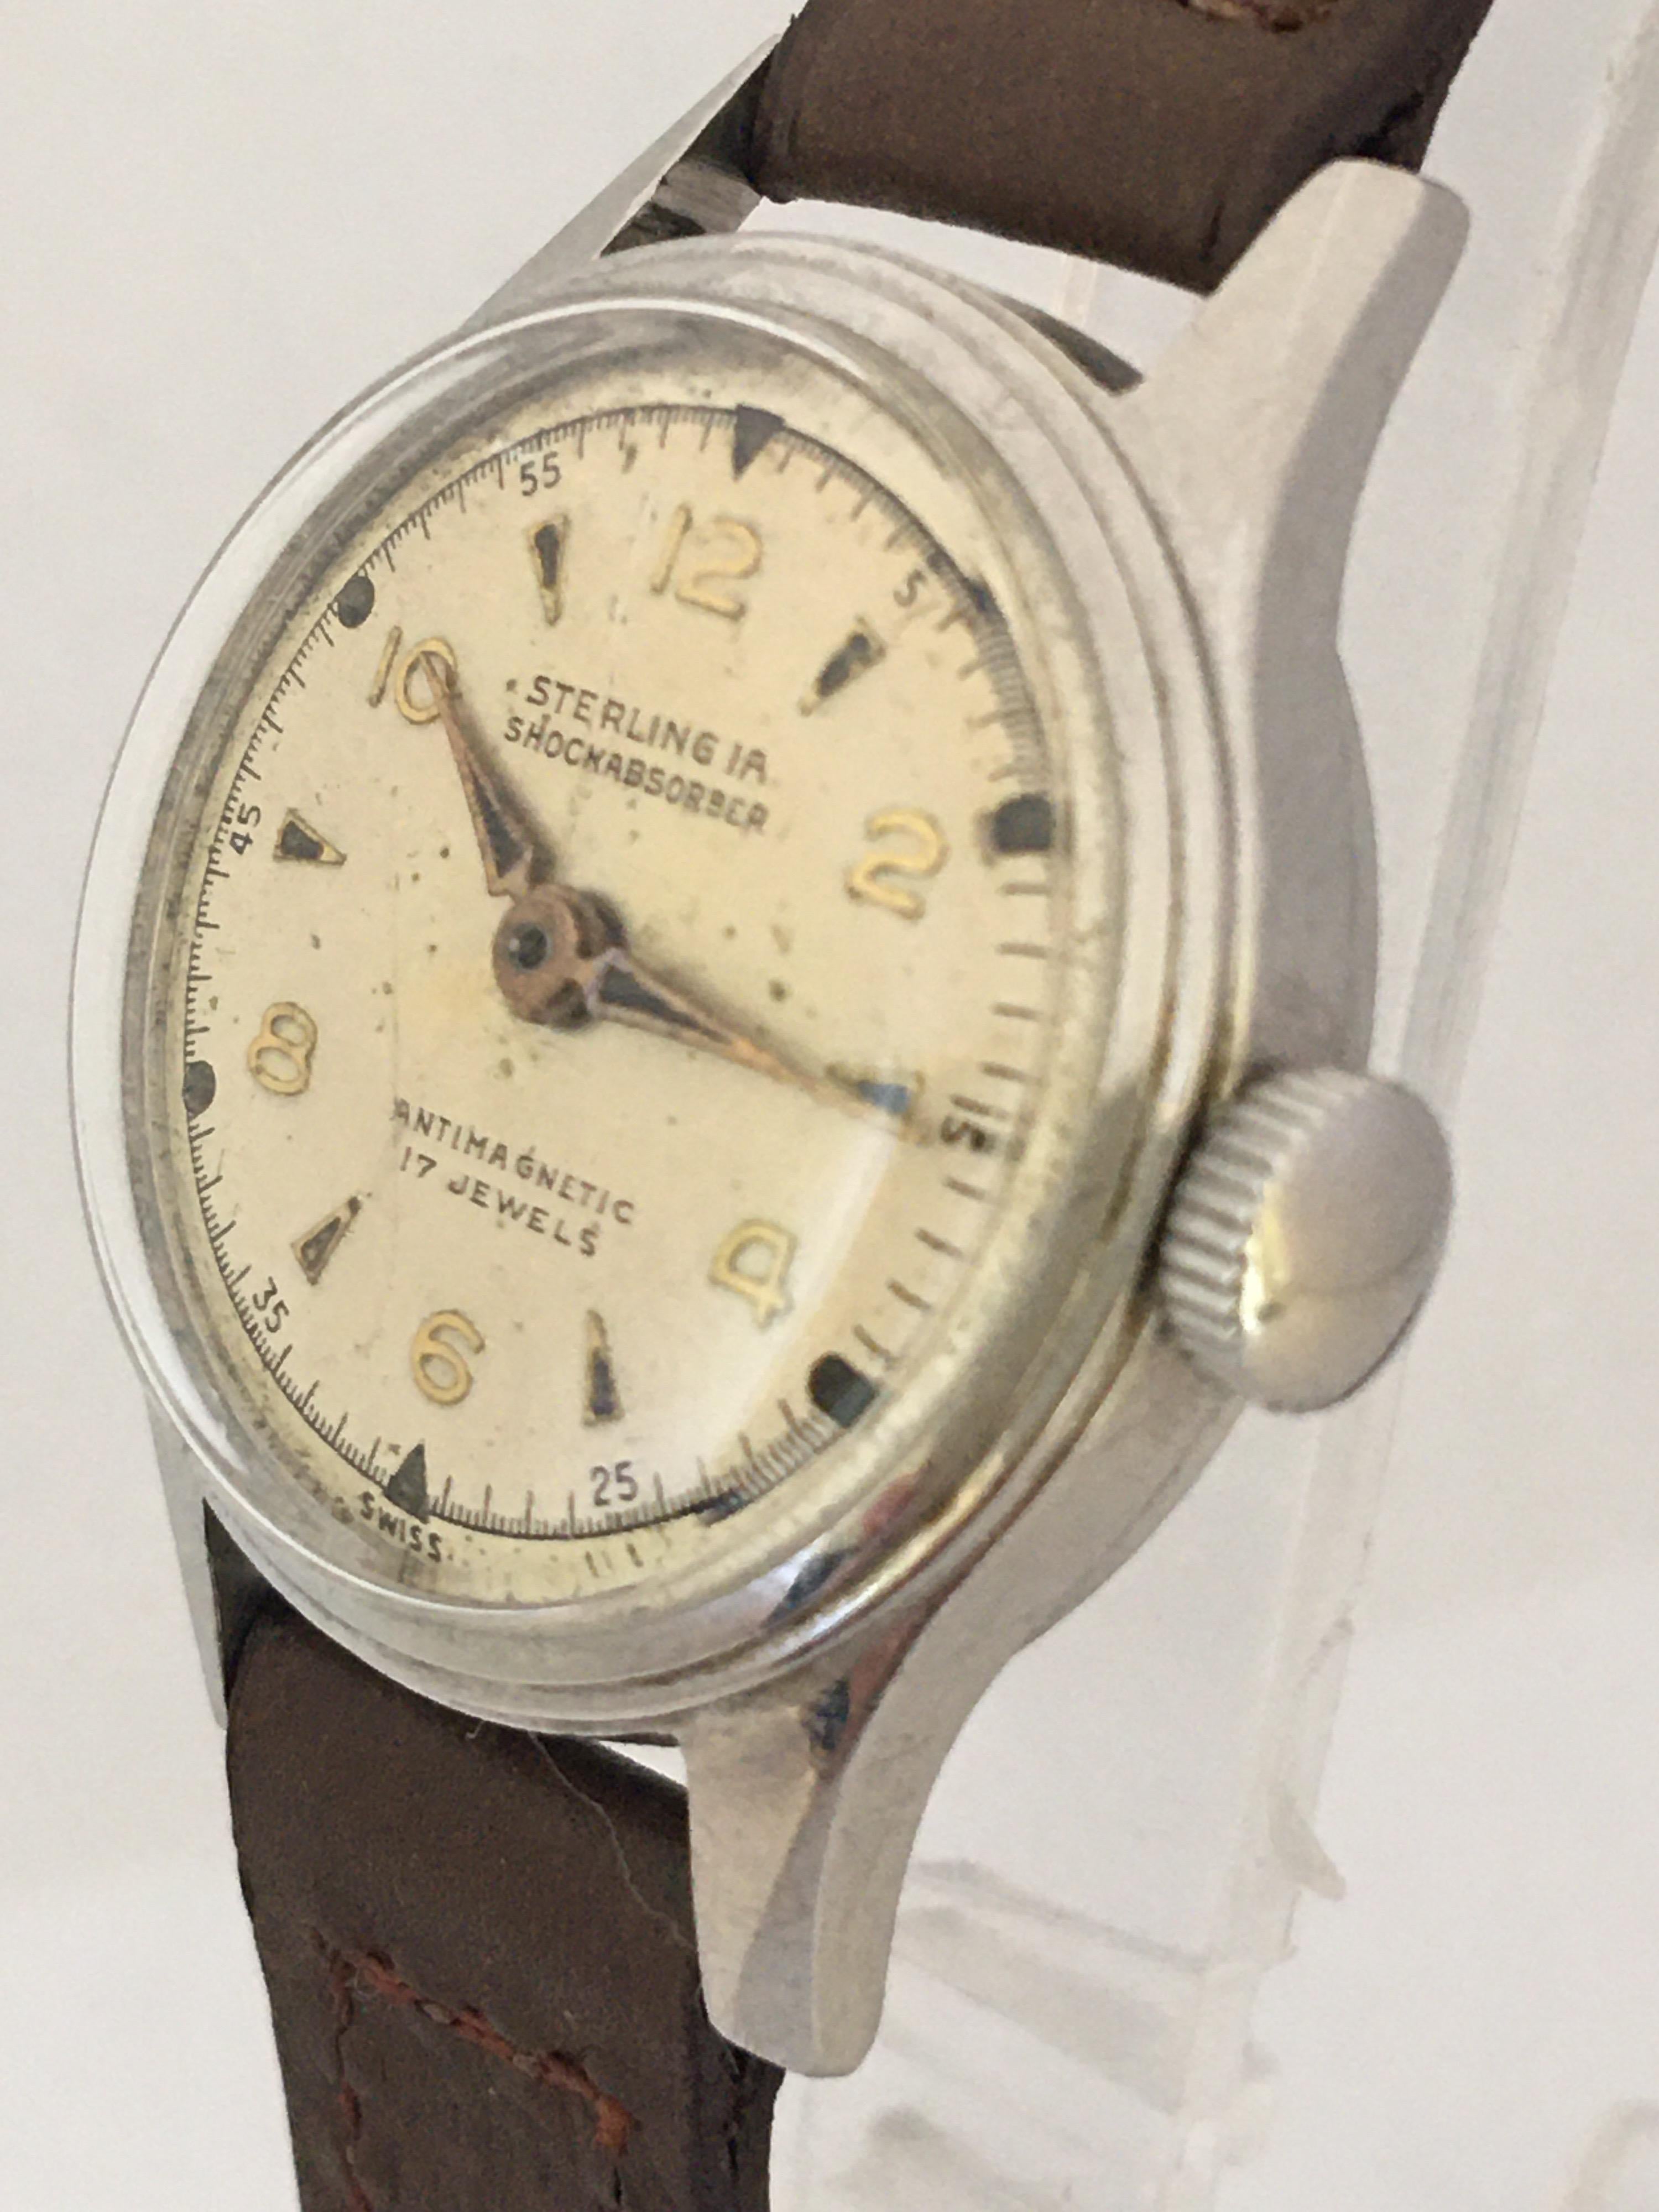 This beautiful vintage pre-owned hand-winding ladies watch is in good working condition and it is running well. Visible signs of ageing and wear with light scratches on the glass and and on the watch case as shown. The dial is a bit worn as